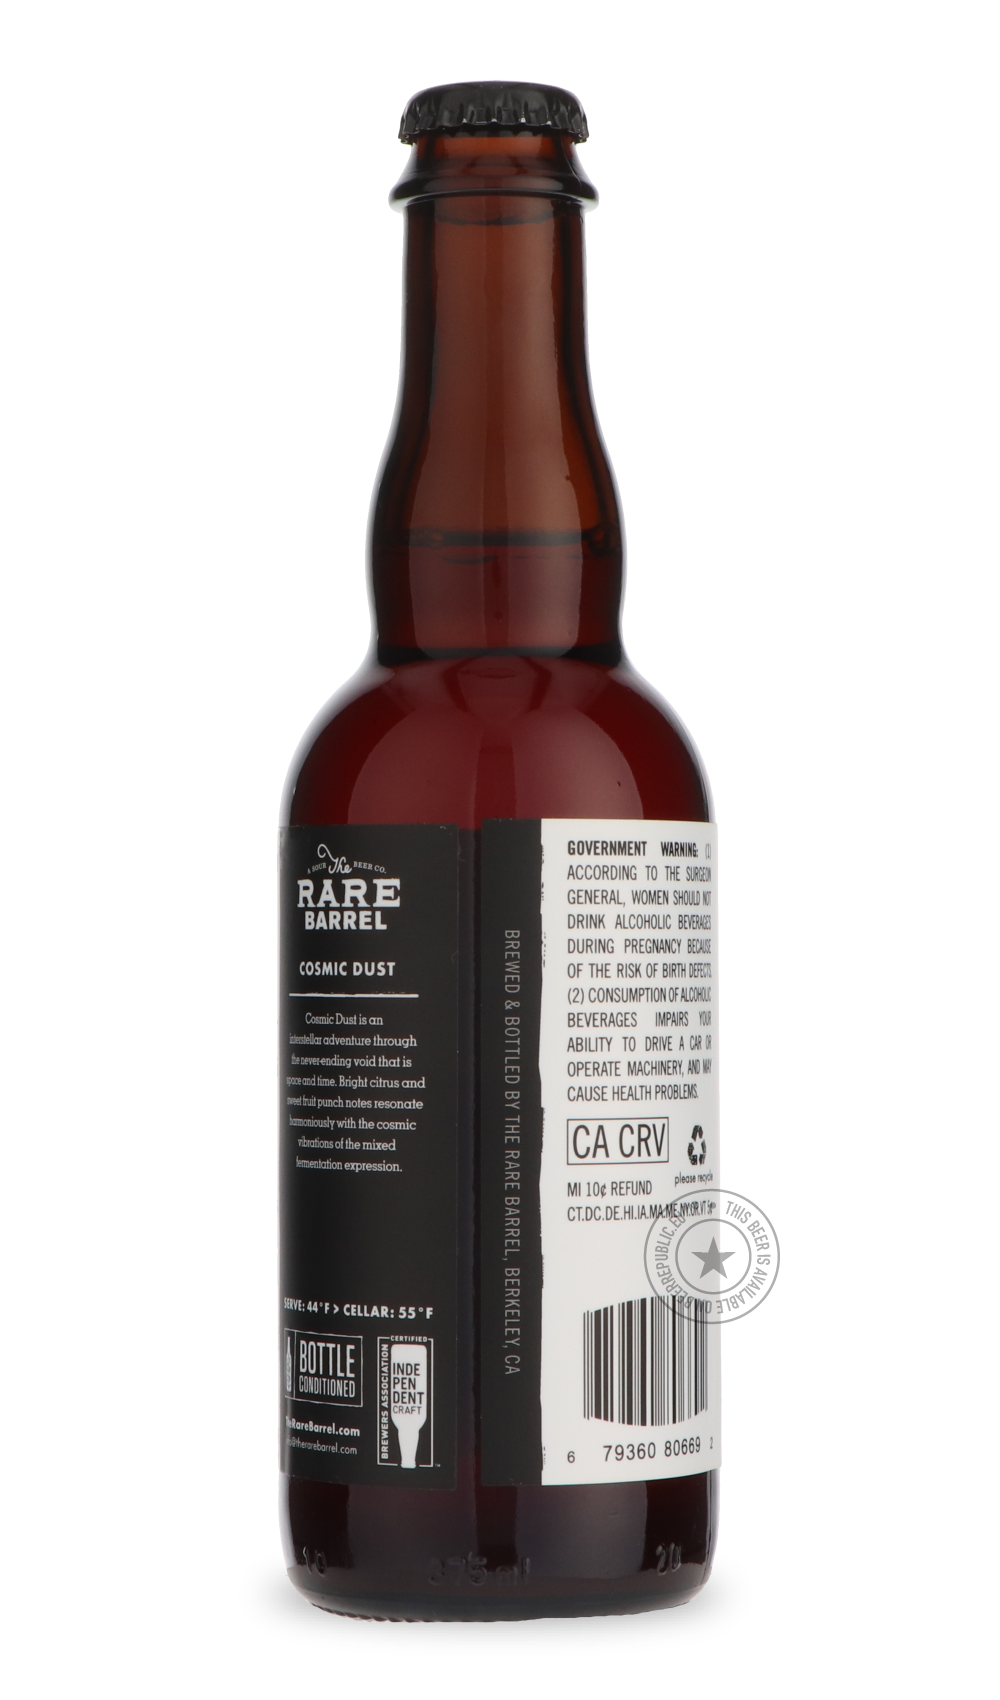 -The Rare Barrel- Cosmic Dust 2022-Sour / Wild & Fruity- Only @ Beer Republic - The best online beer store for American & Canadian craft beer - Buy beer online from the USA and Canada - Bier online kopen - Amerikaans bier kopen - Craft beer store - Craft beer kopen - Amerikanisch bier kaufen - Bier online kaufen - Acheter biere online - IPA - Stout - Porter - New England IPA - Hazy IPA - Imperial Stout - Barrel Aged - Barrel Aged Imperial Stout - Brown - Dark beer - Blond - Blonde - Pilsner - Lager - Wheat 